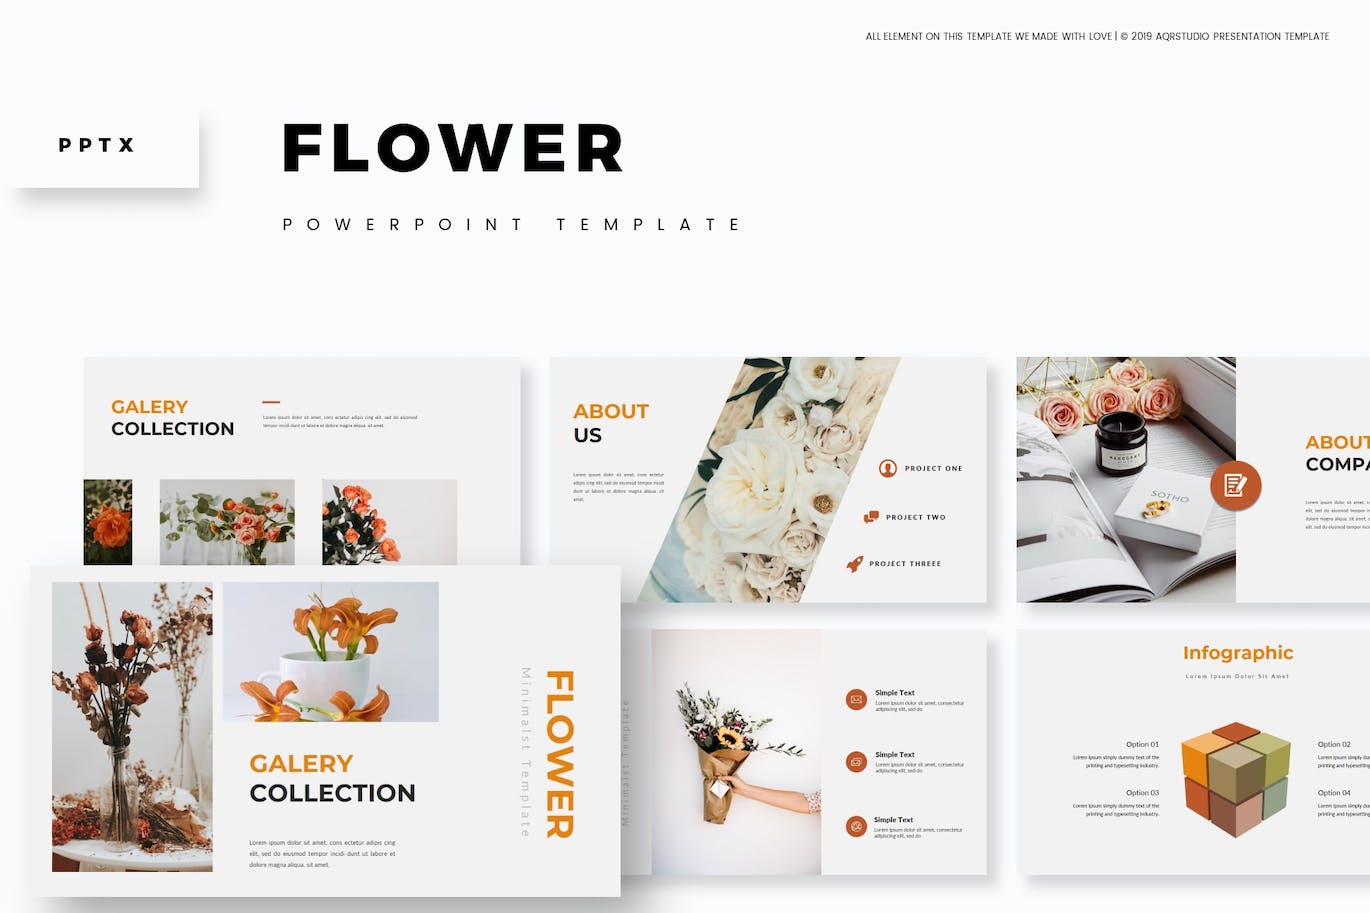 Bundle of images of unique presentation template slides on the theme of flowers.